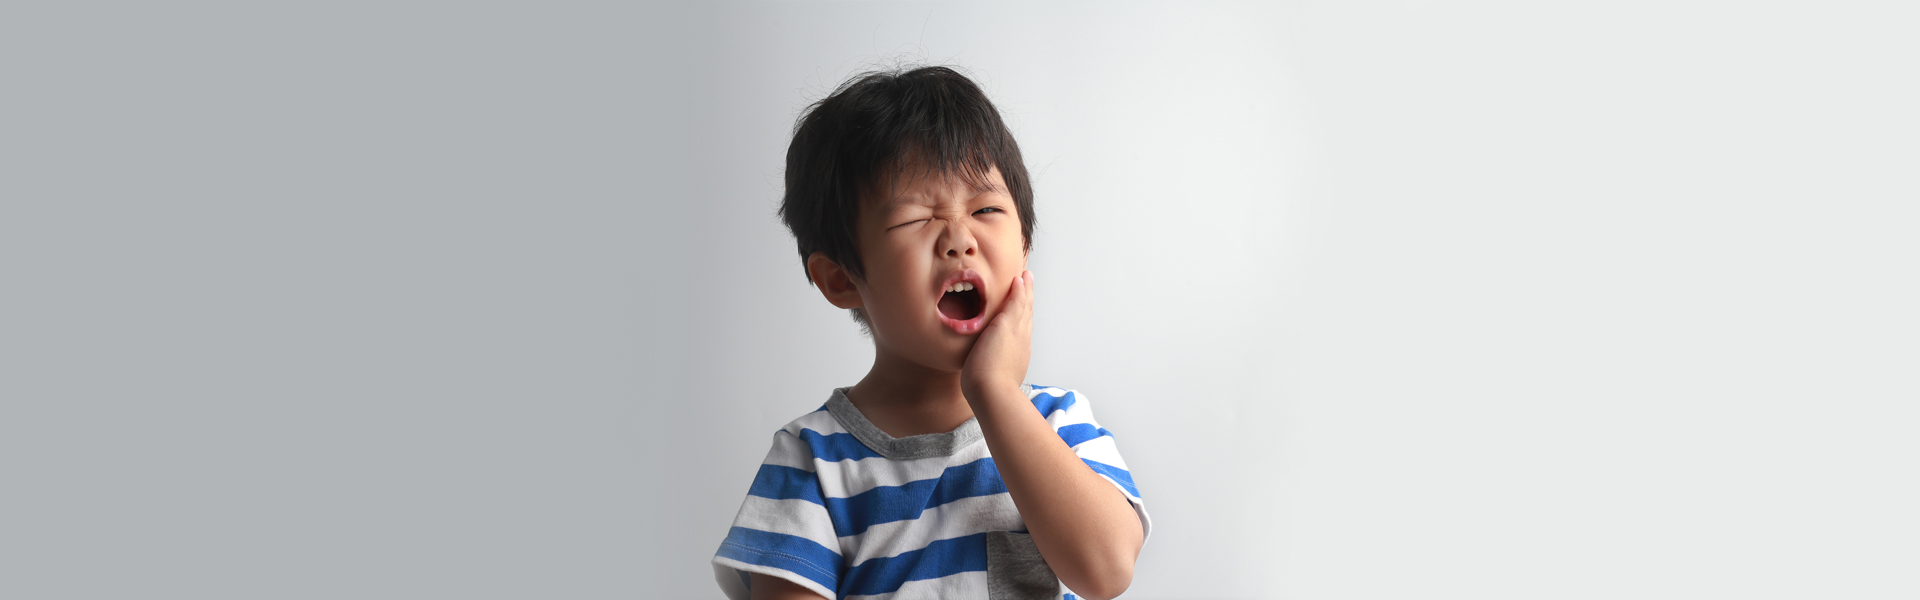 How to Handle Tooth Pain in Children?